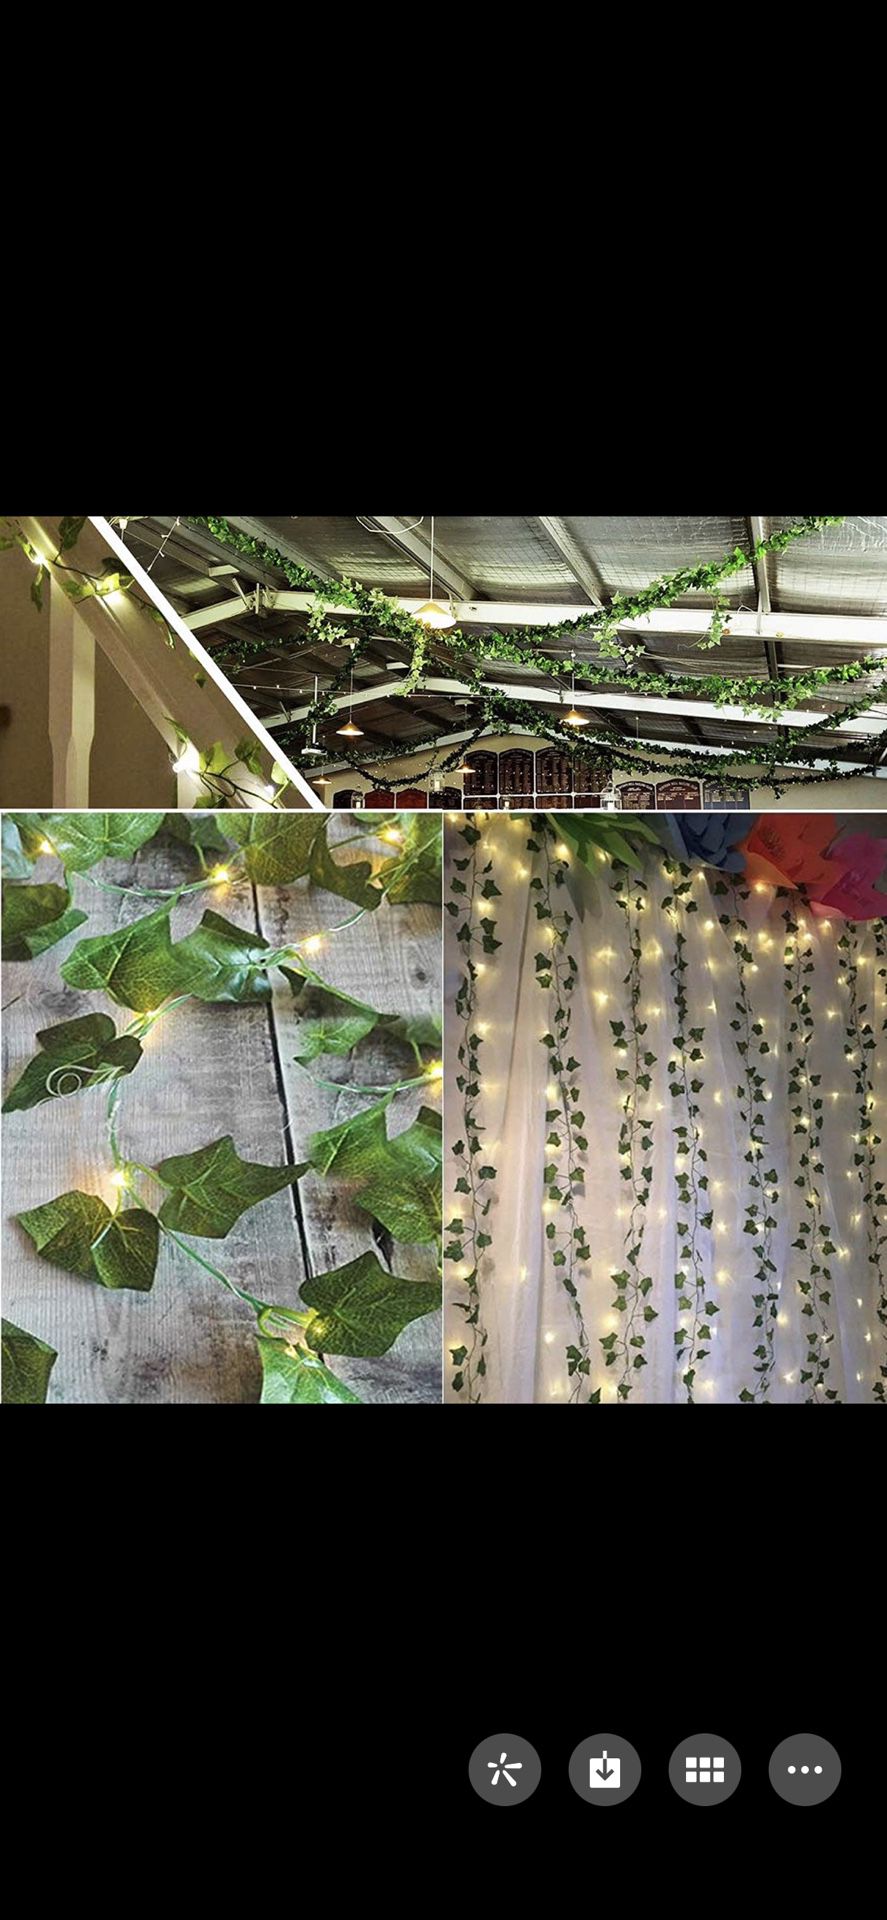 12 Pack Fake Vines for Room Decor with 100 LED String Light Artificial Ivy Garland Hanging Plants Faux Greenery Leaves Bedroom Aesthetic Decor for Hom